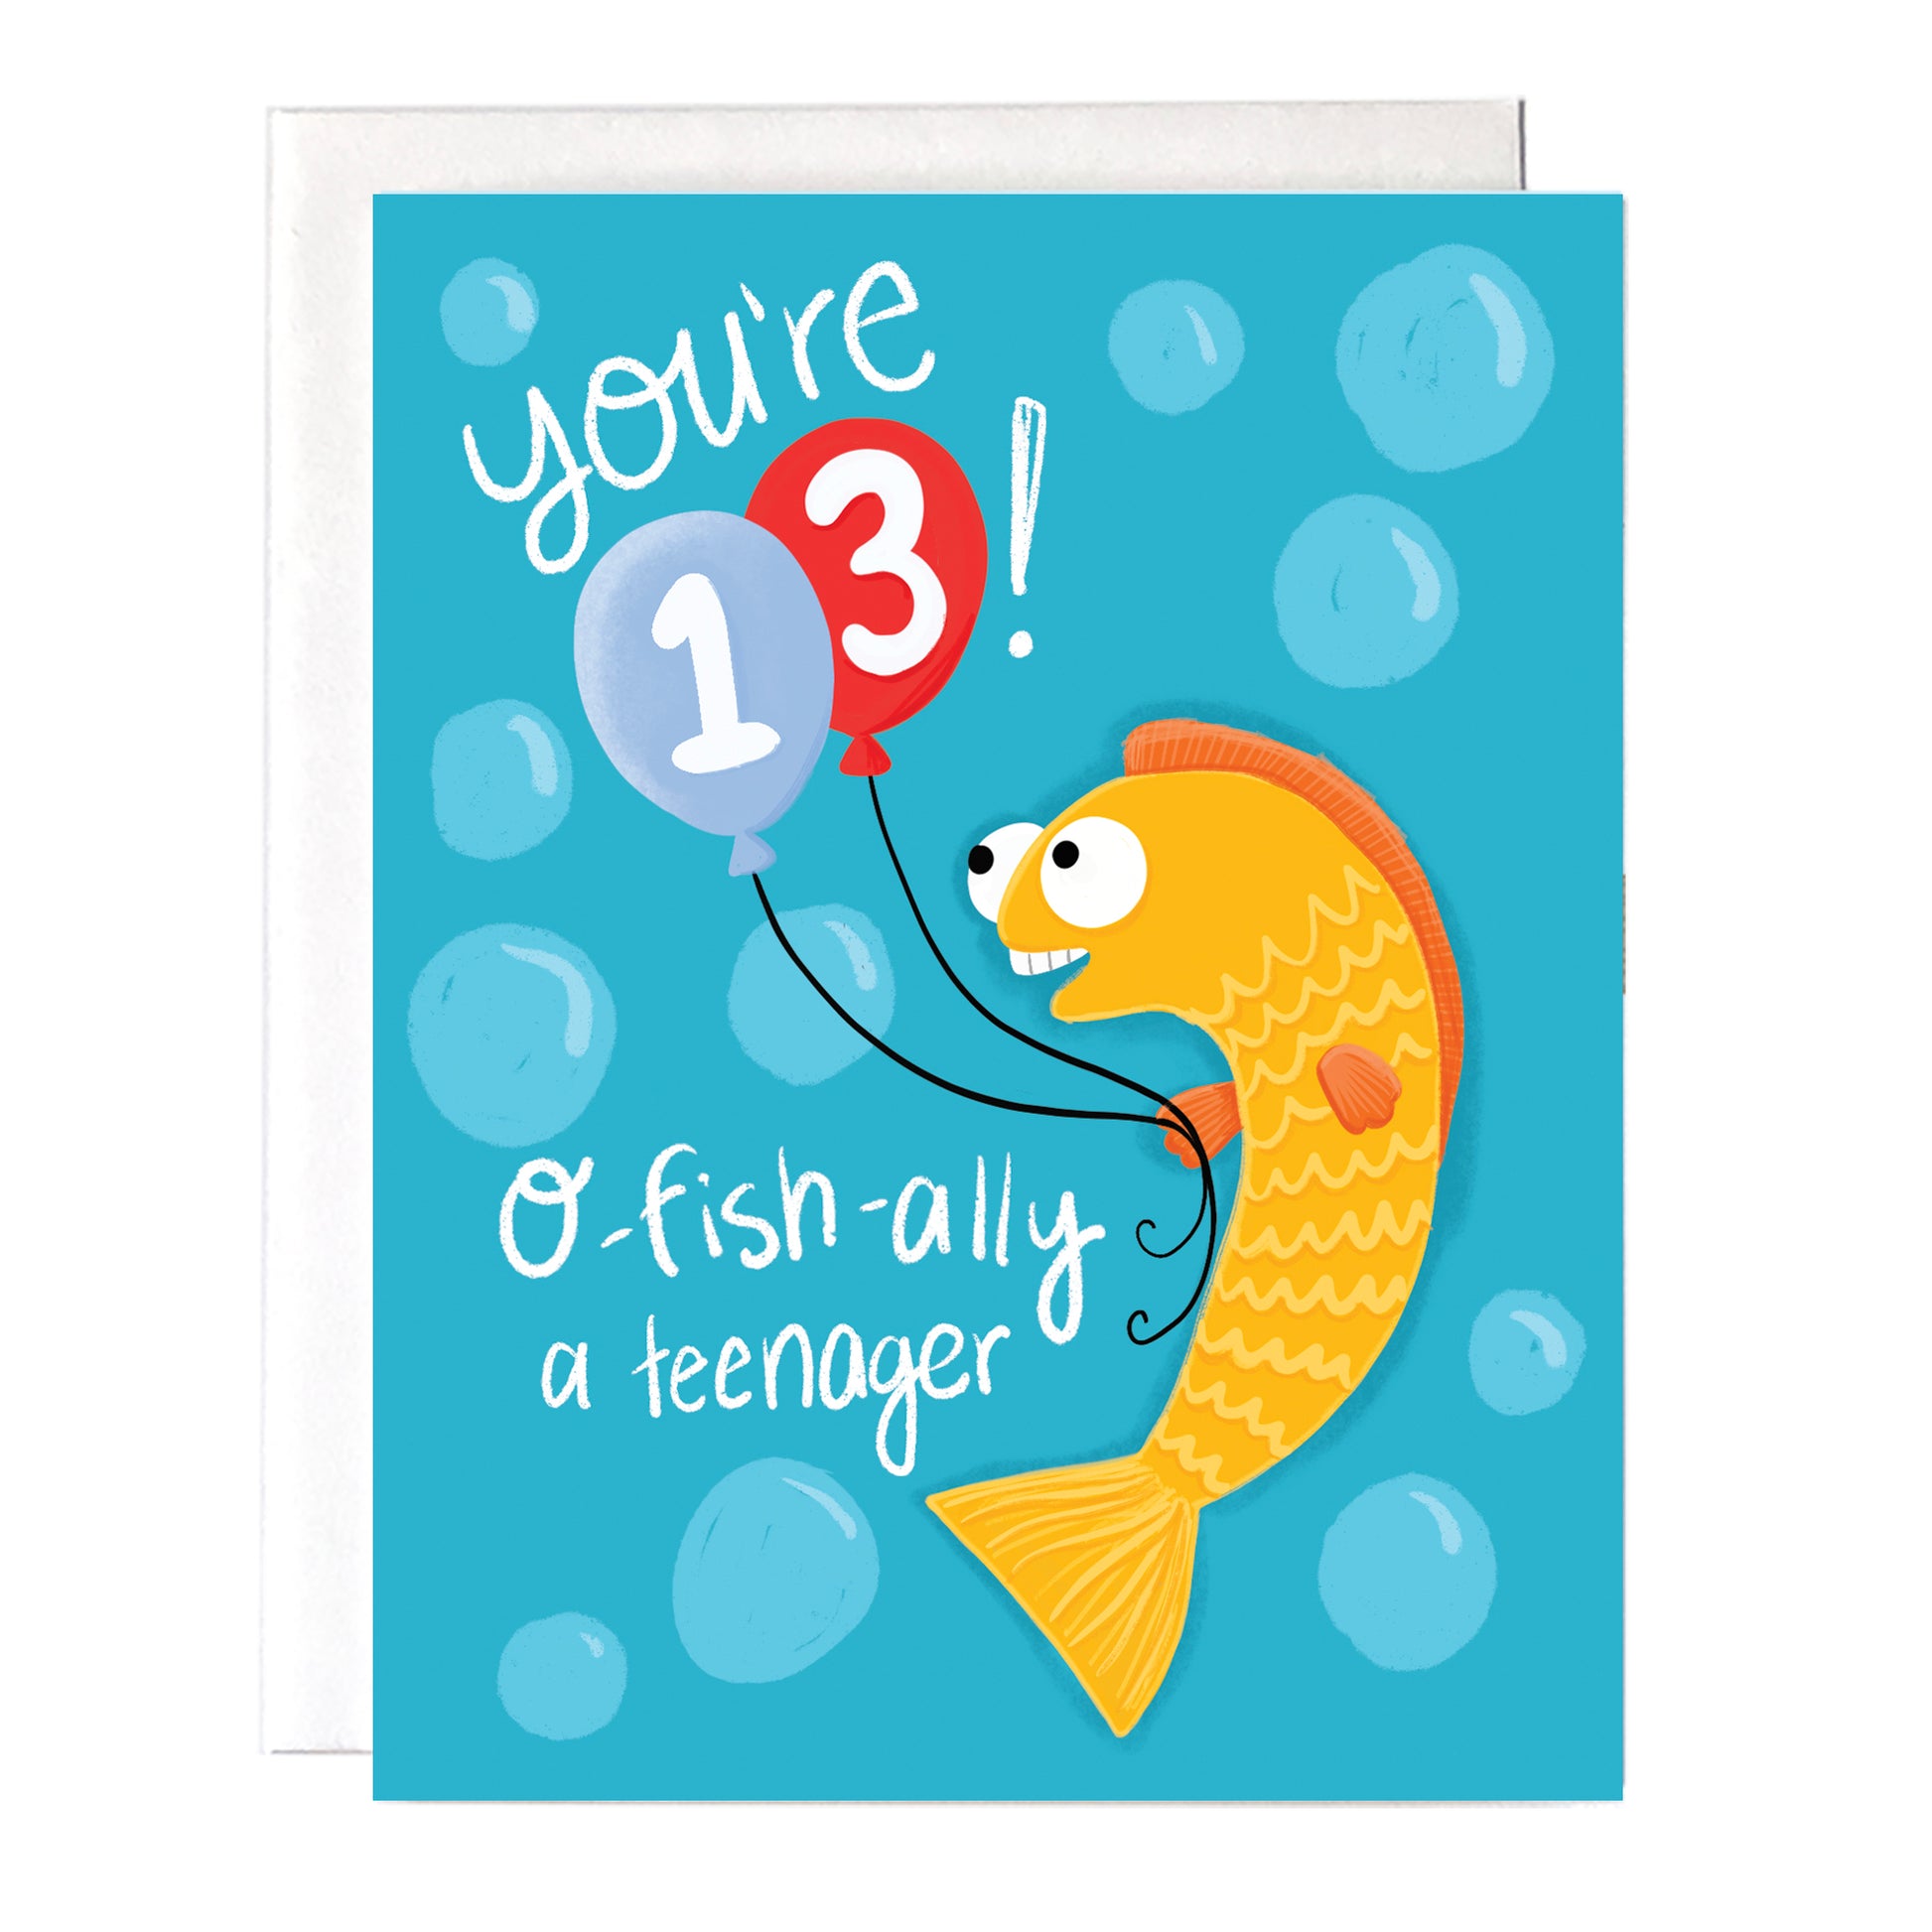 a 13th birthday card with a cute fish on it. The card reads "you're 13, O-FISH-ally a teenager"